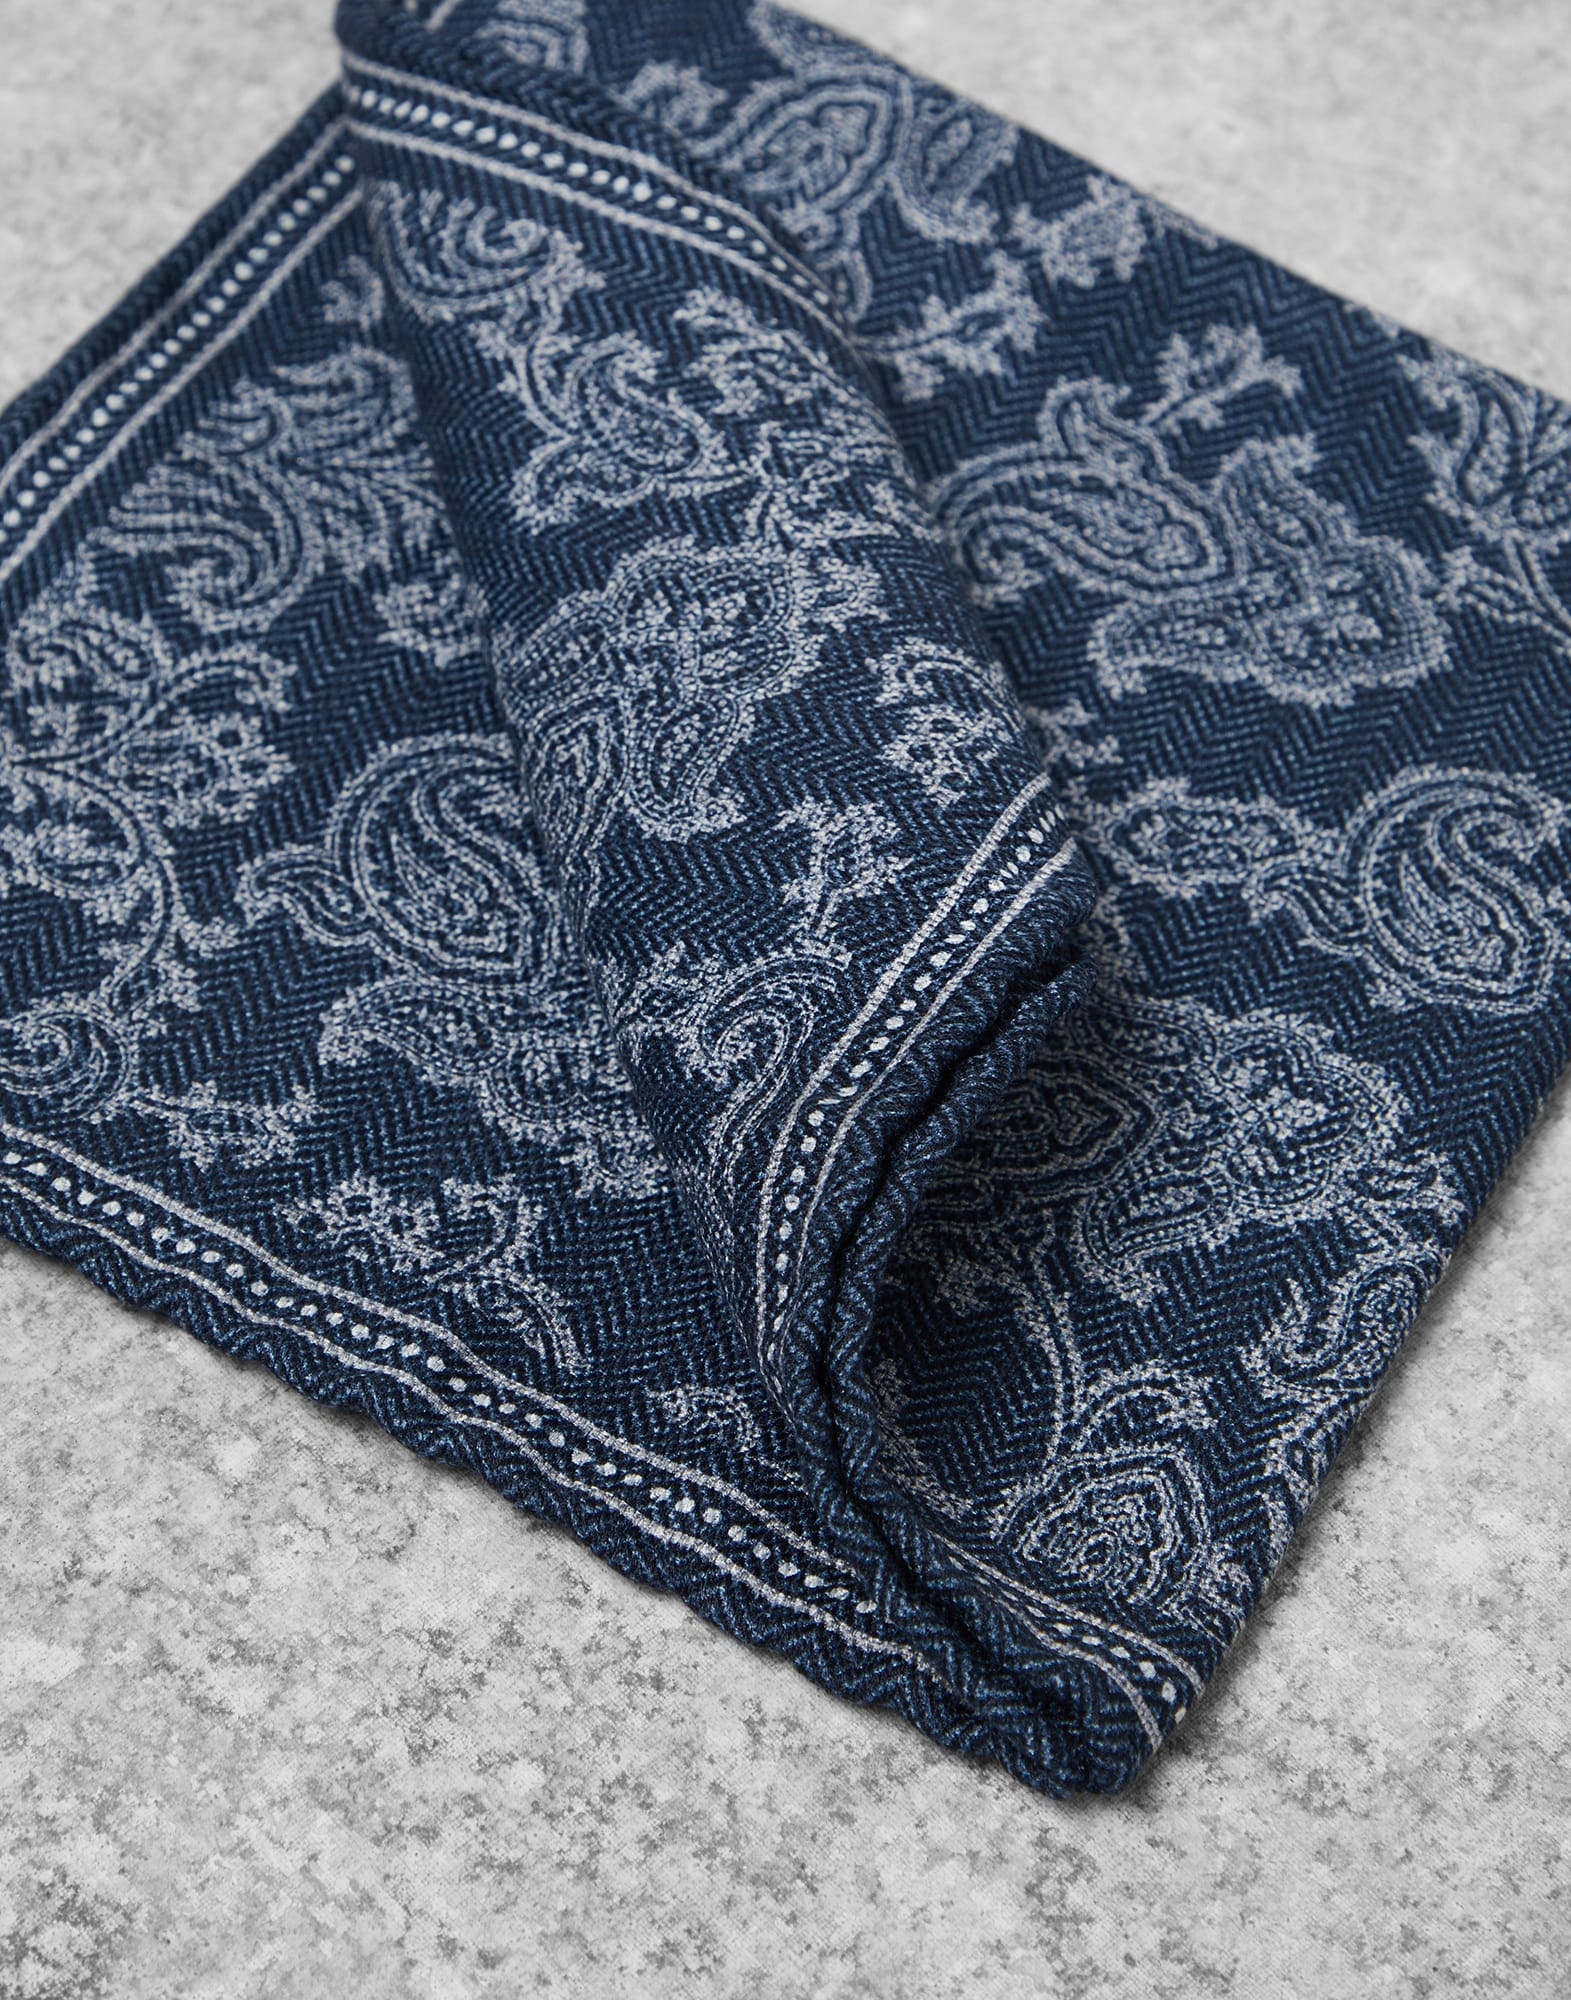 Silk pocket square with paisley design - 2